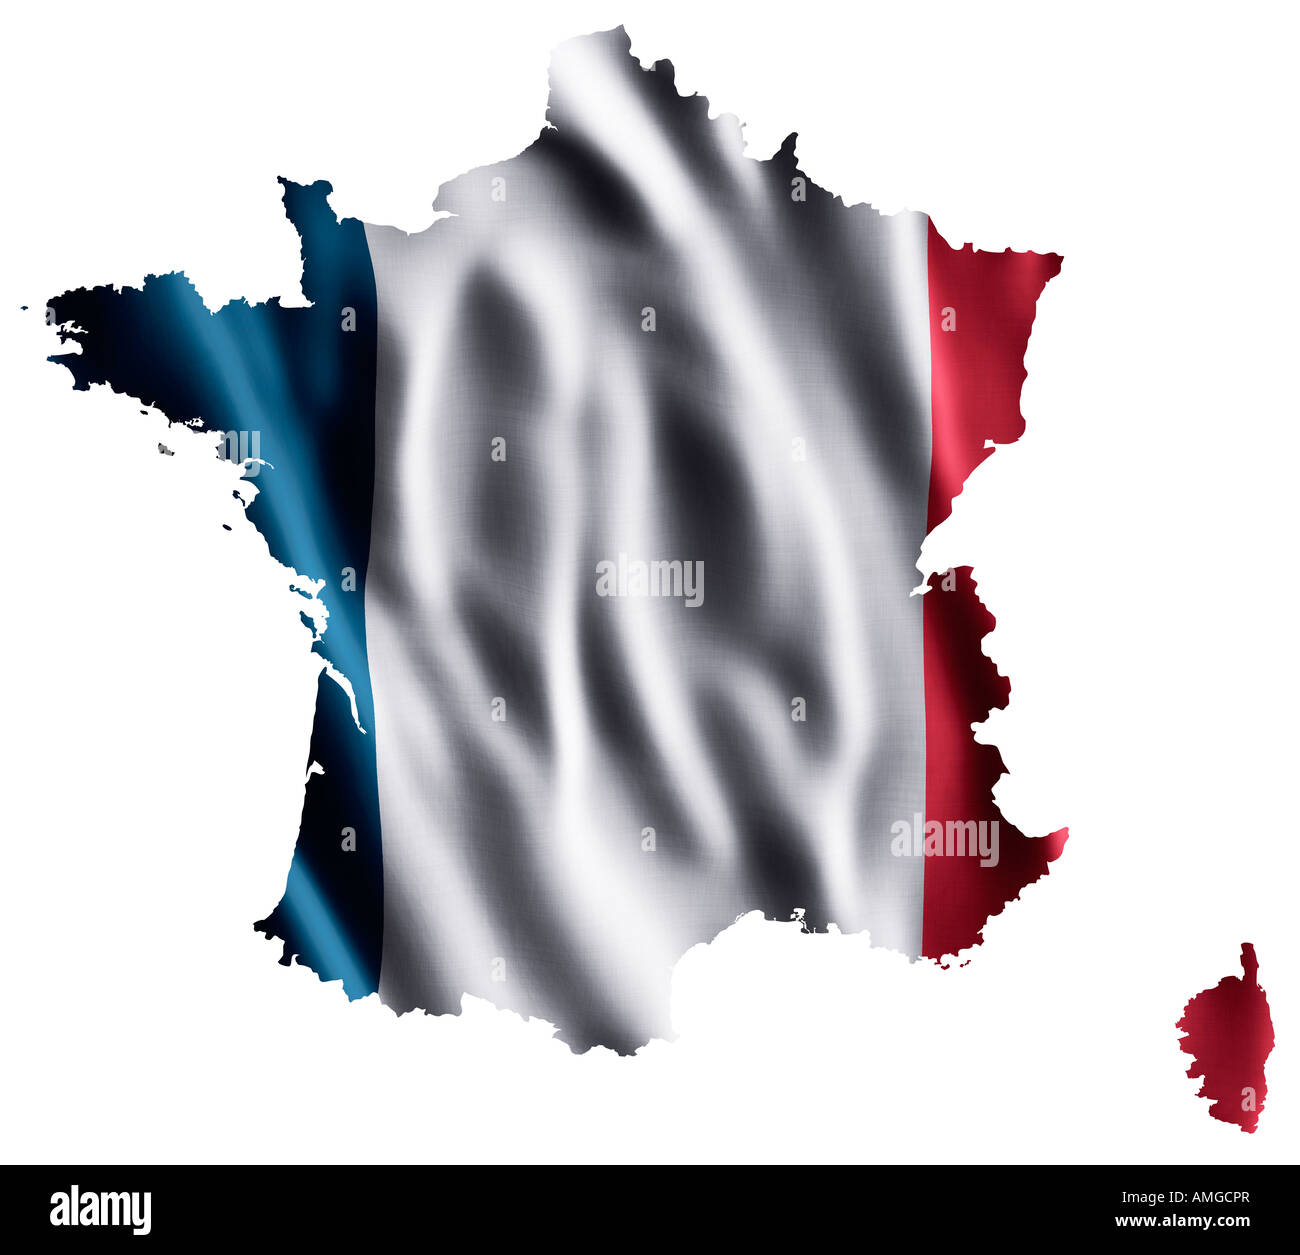 National flag of France as a map Stock Photo